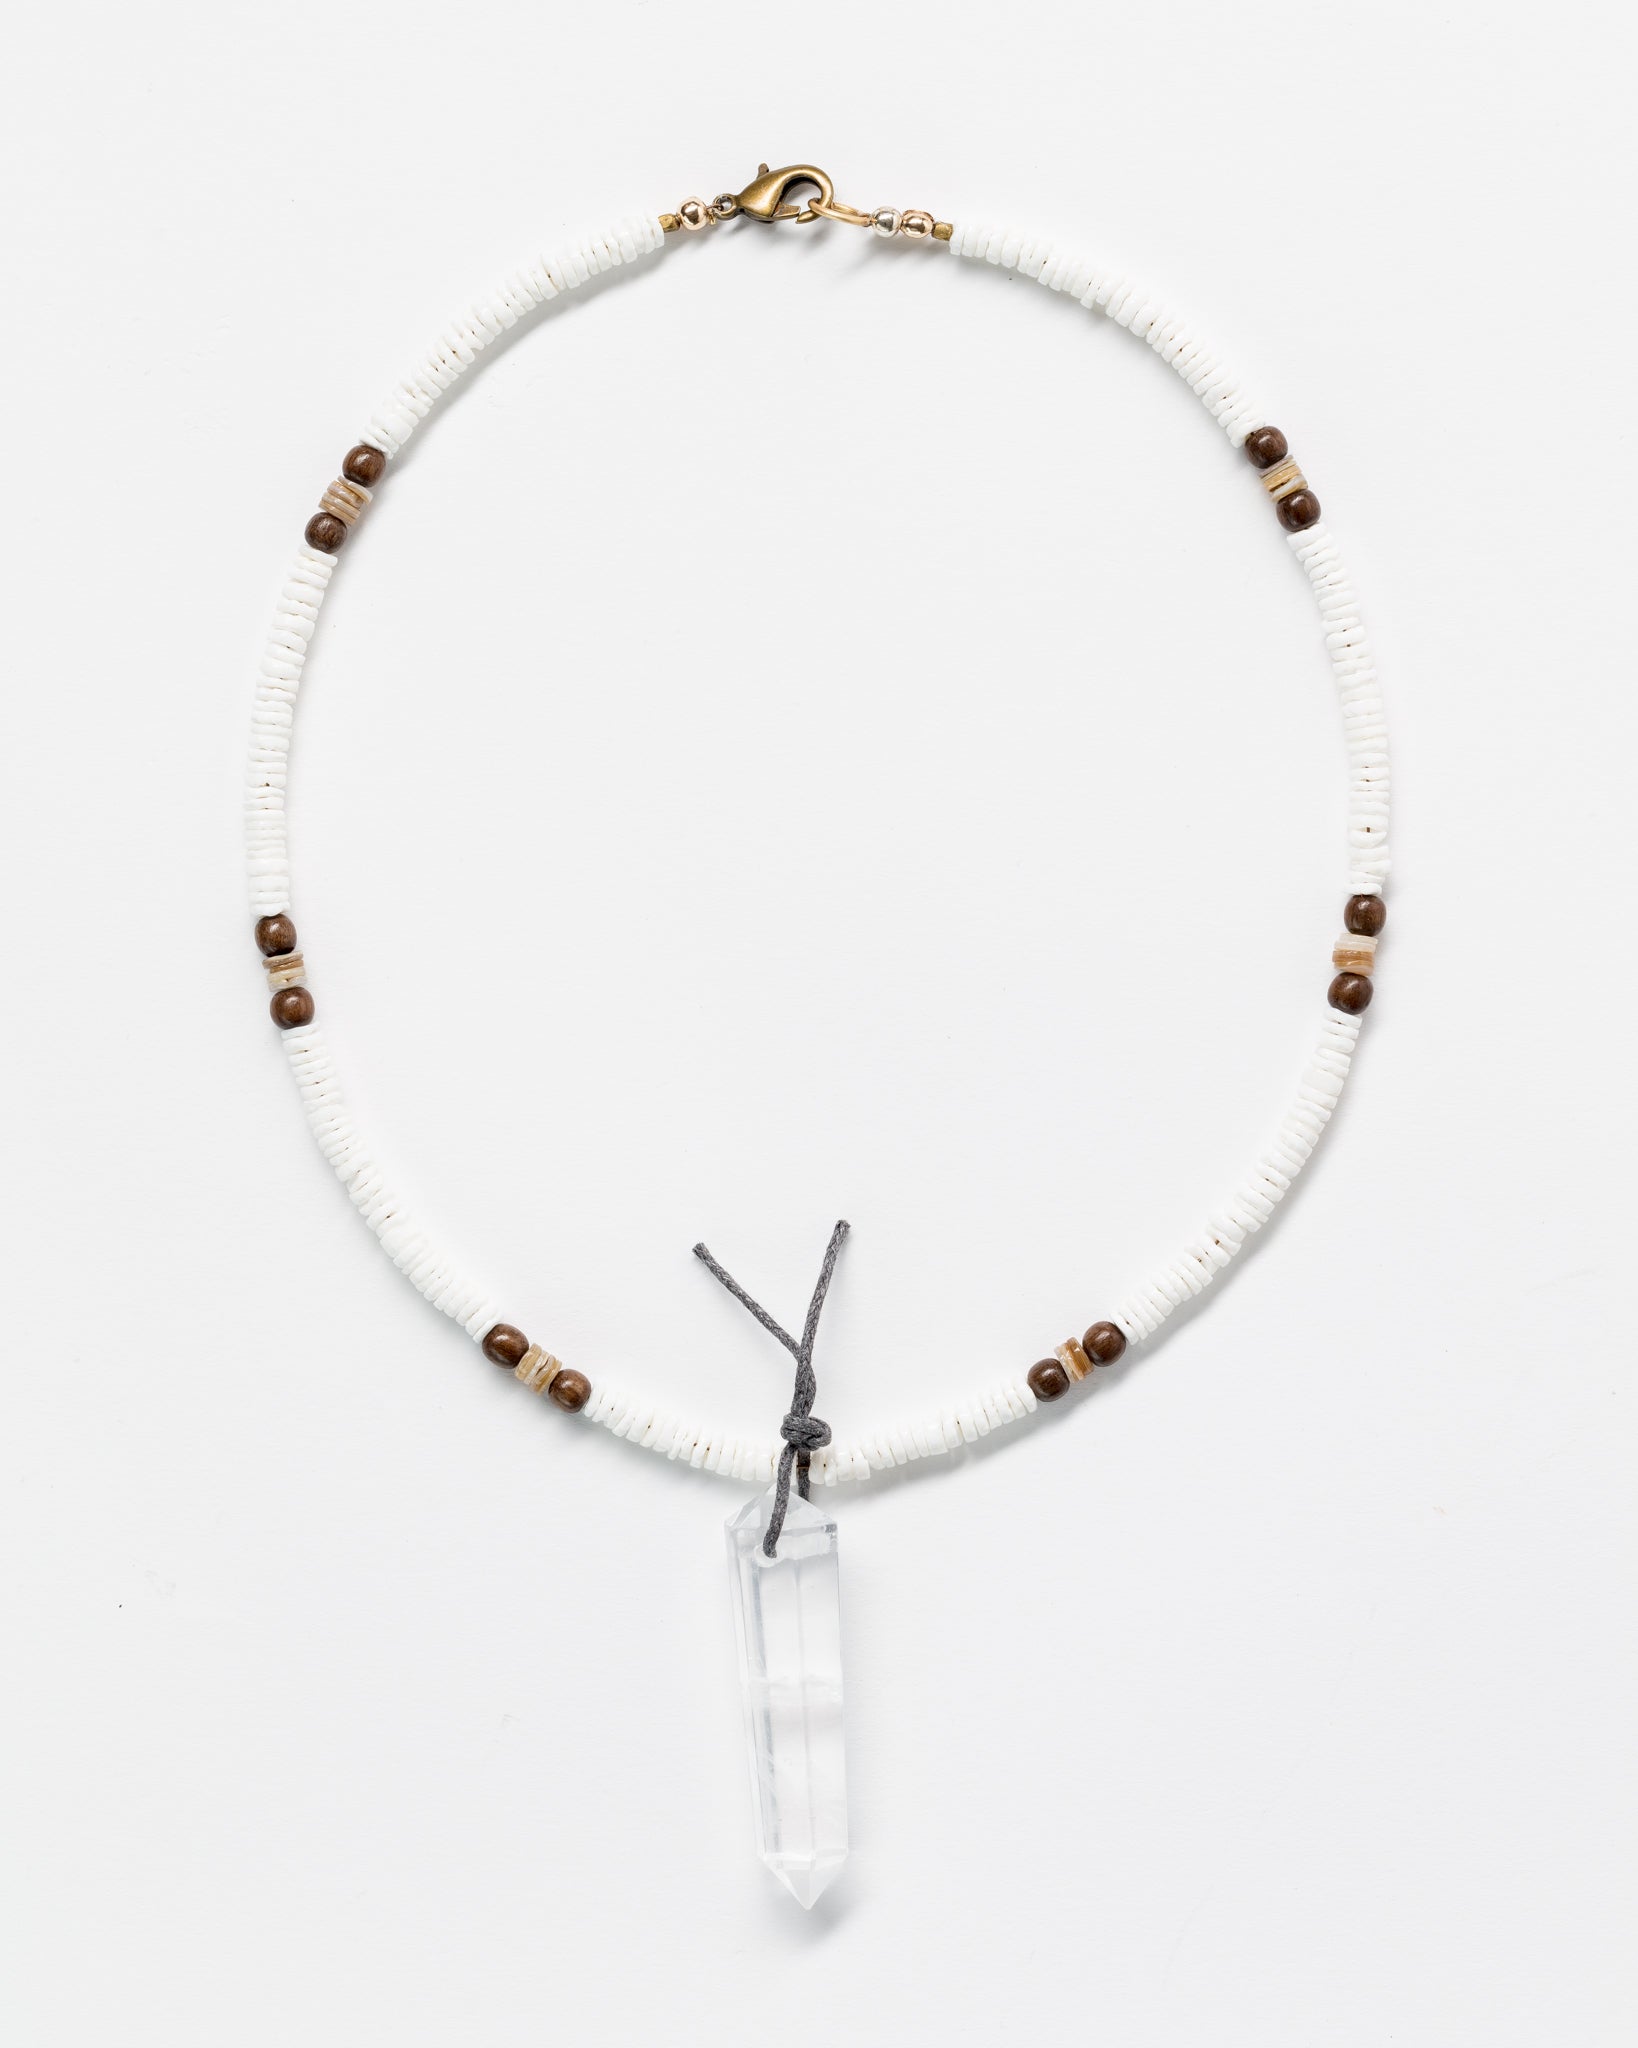 A White Designs By Raya Necklace featuring a clear quartz crystal pendant, strung with white and brown Arizona-style beads, displayed against a white background.